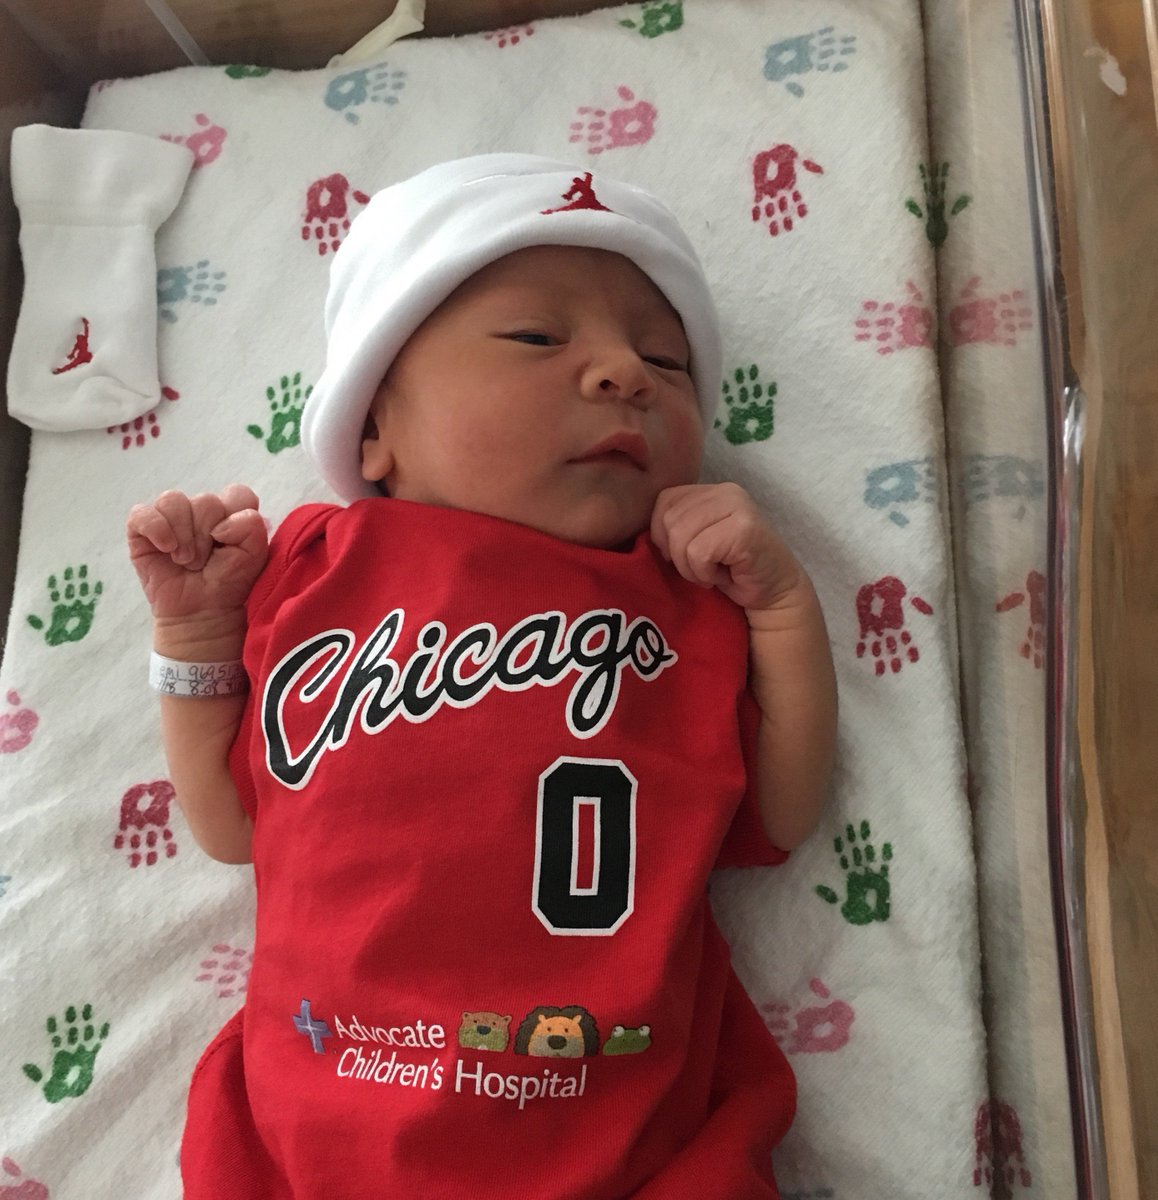 bulls jersey for baby